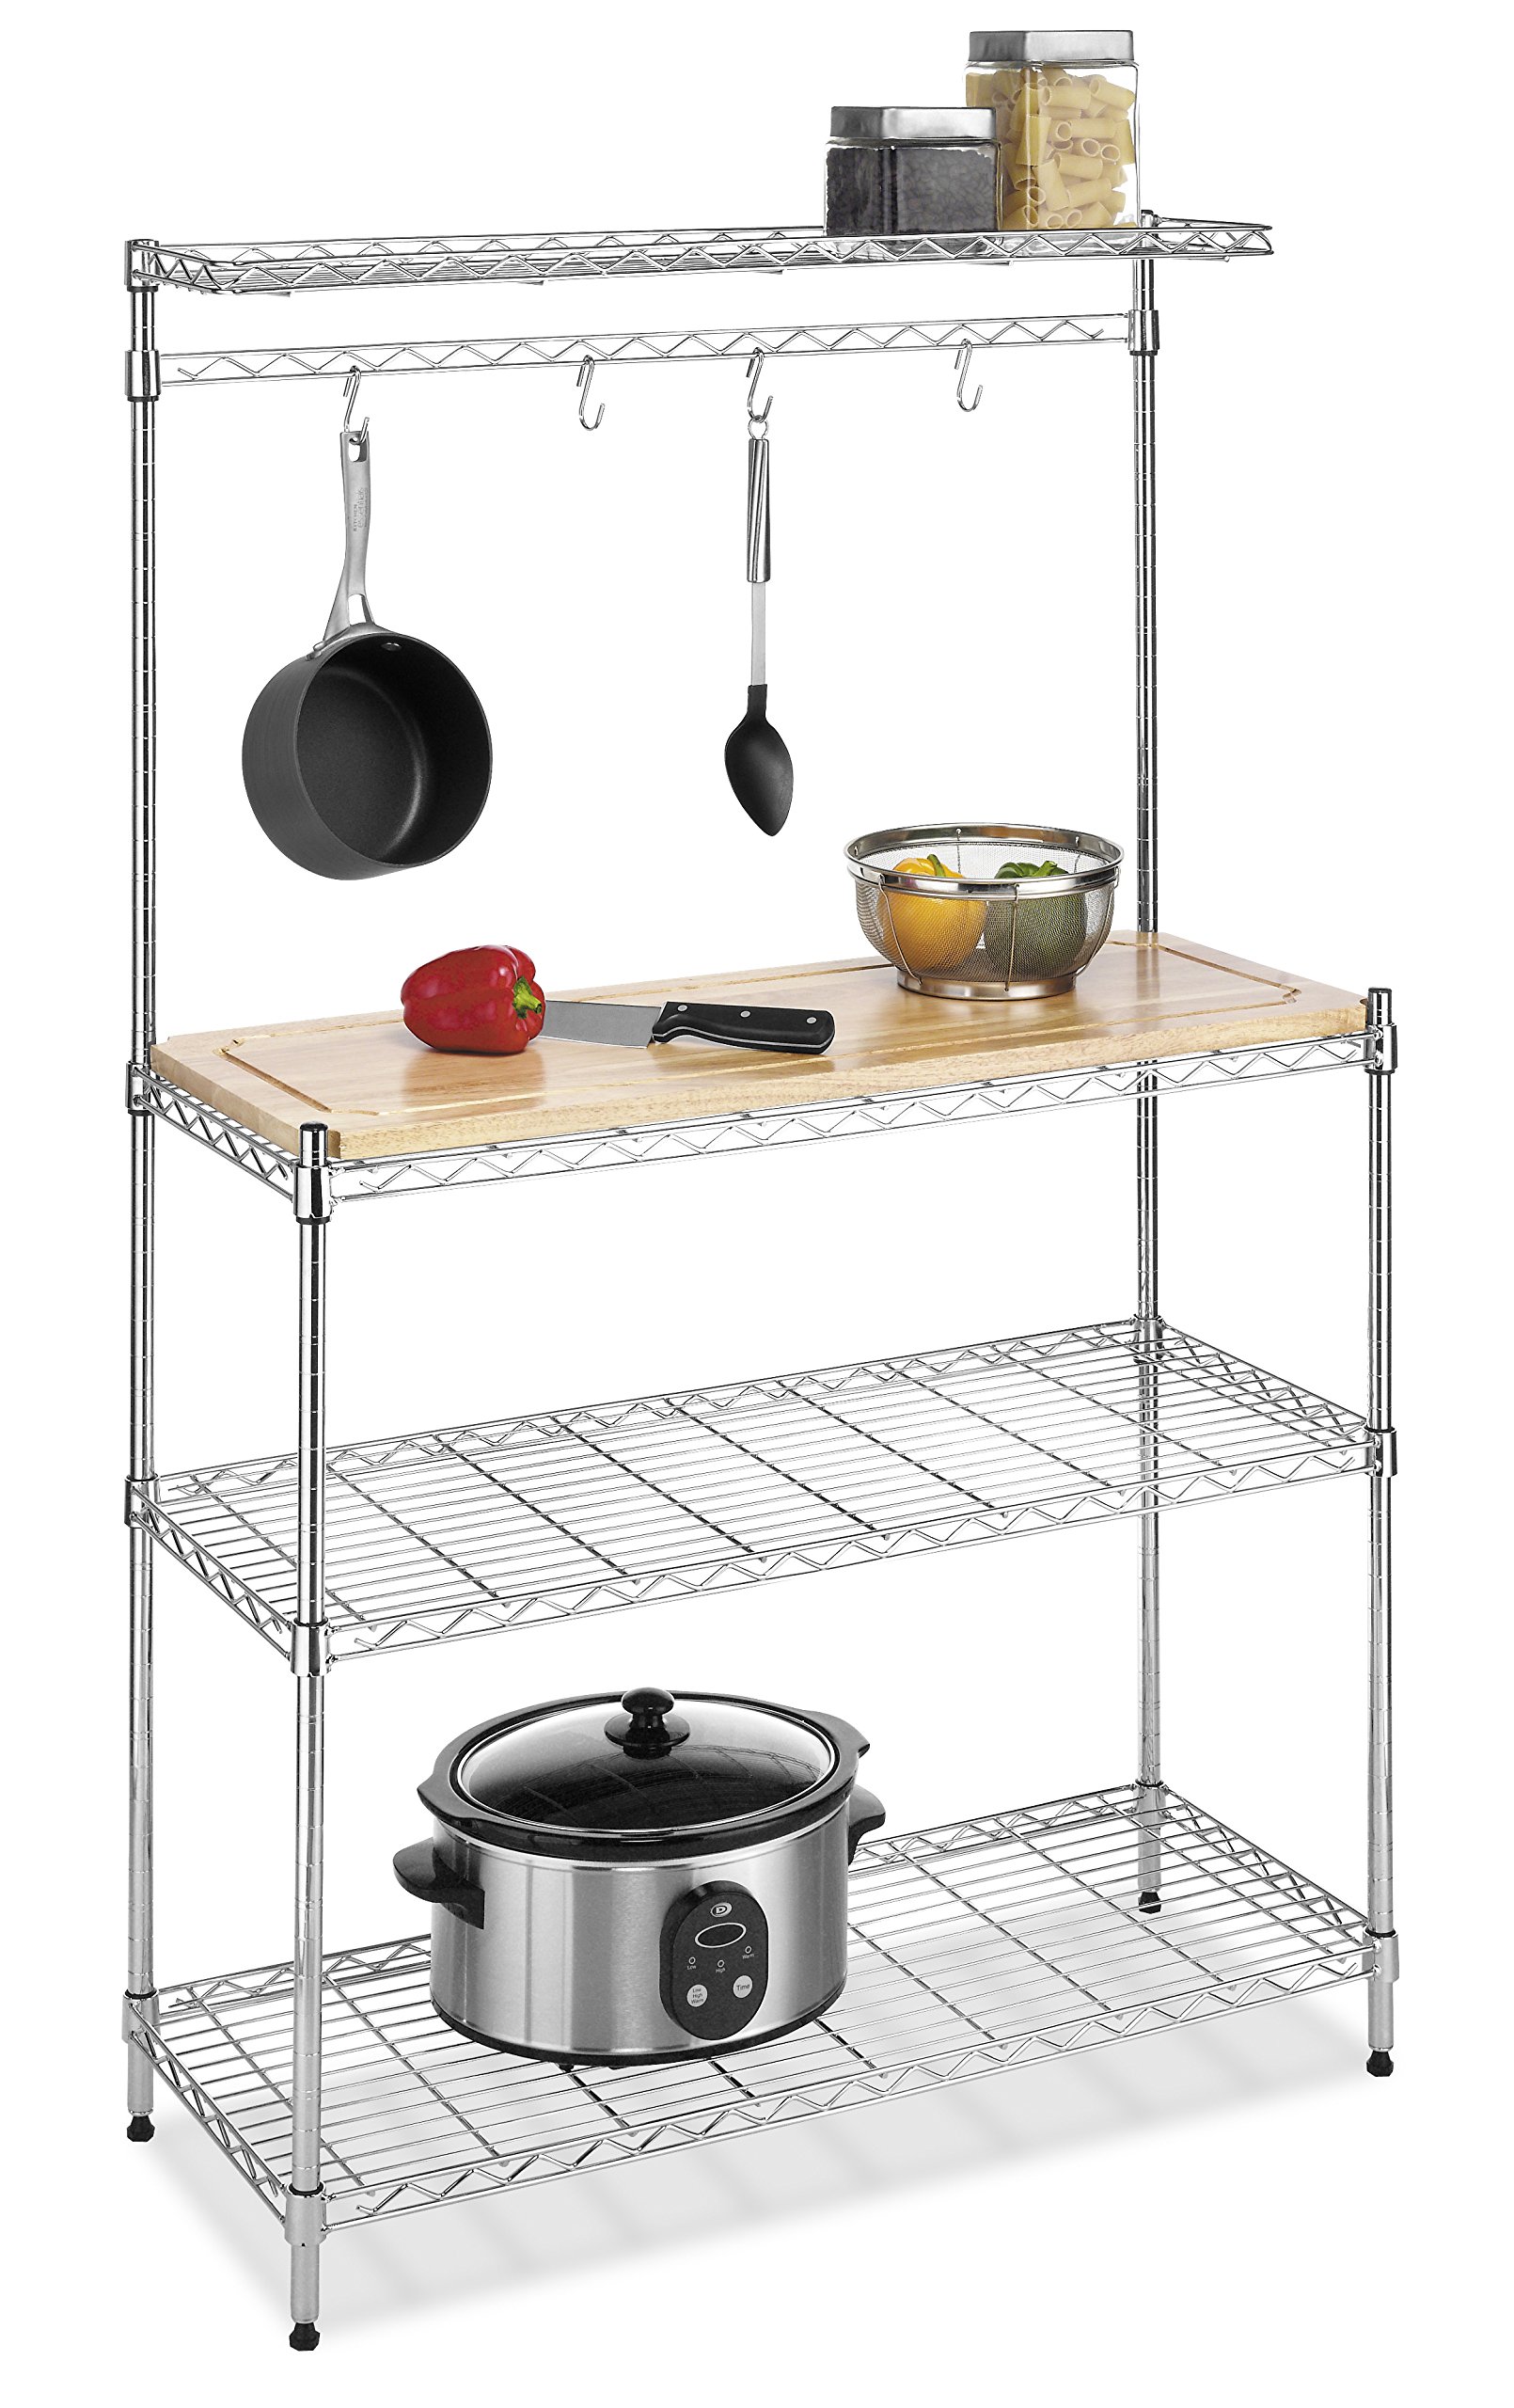 Whitmor Supreme Baker’s Rack w/ Removable Wood Cutting Board $49.30 + Free Shipping